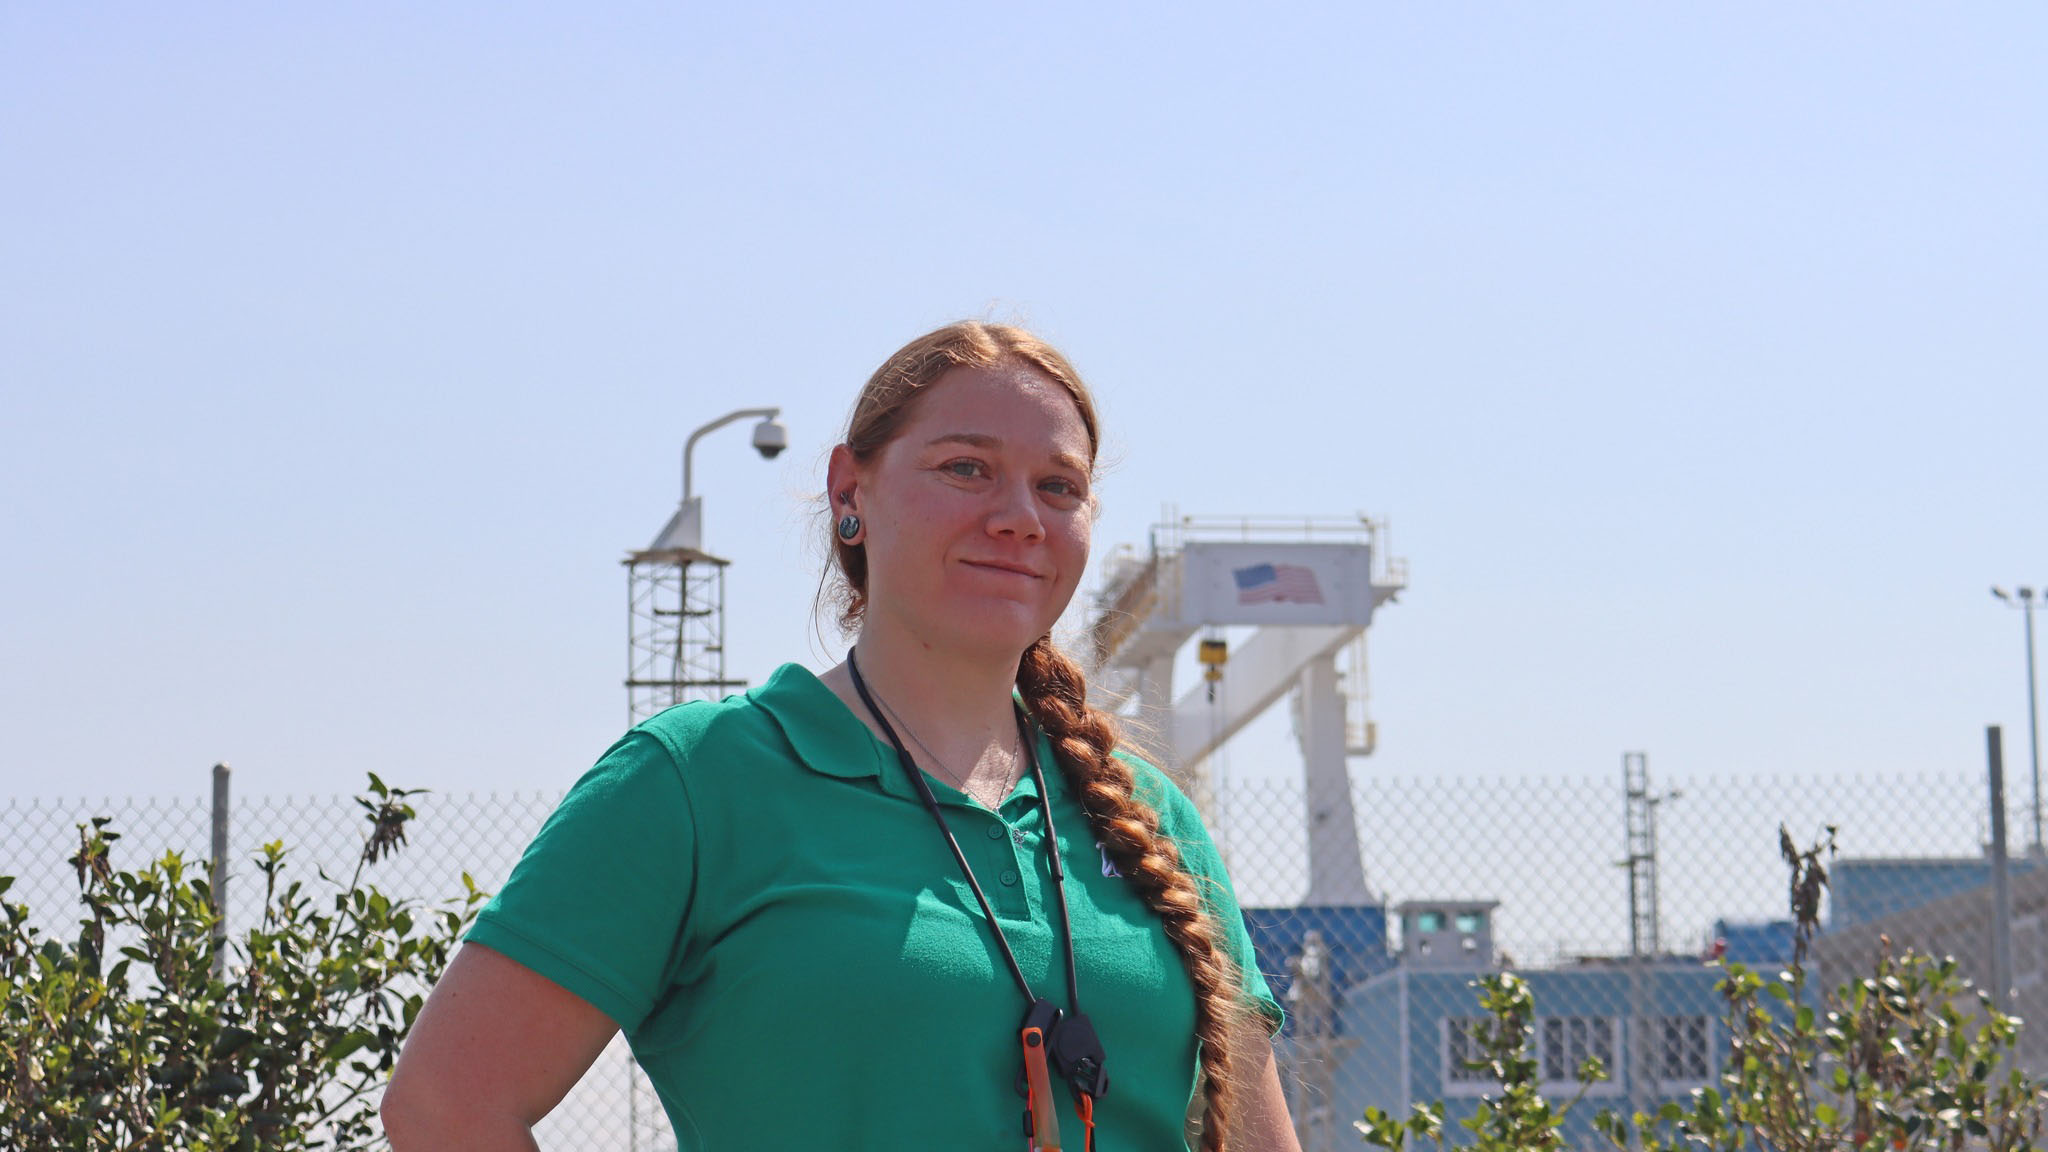 Tori Stroburg is a mechanical maintenance supervisor at Waterford 3 Steam Electric Station